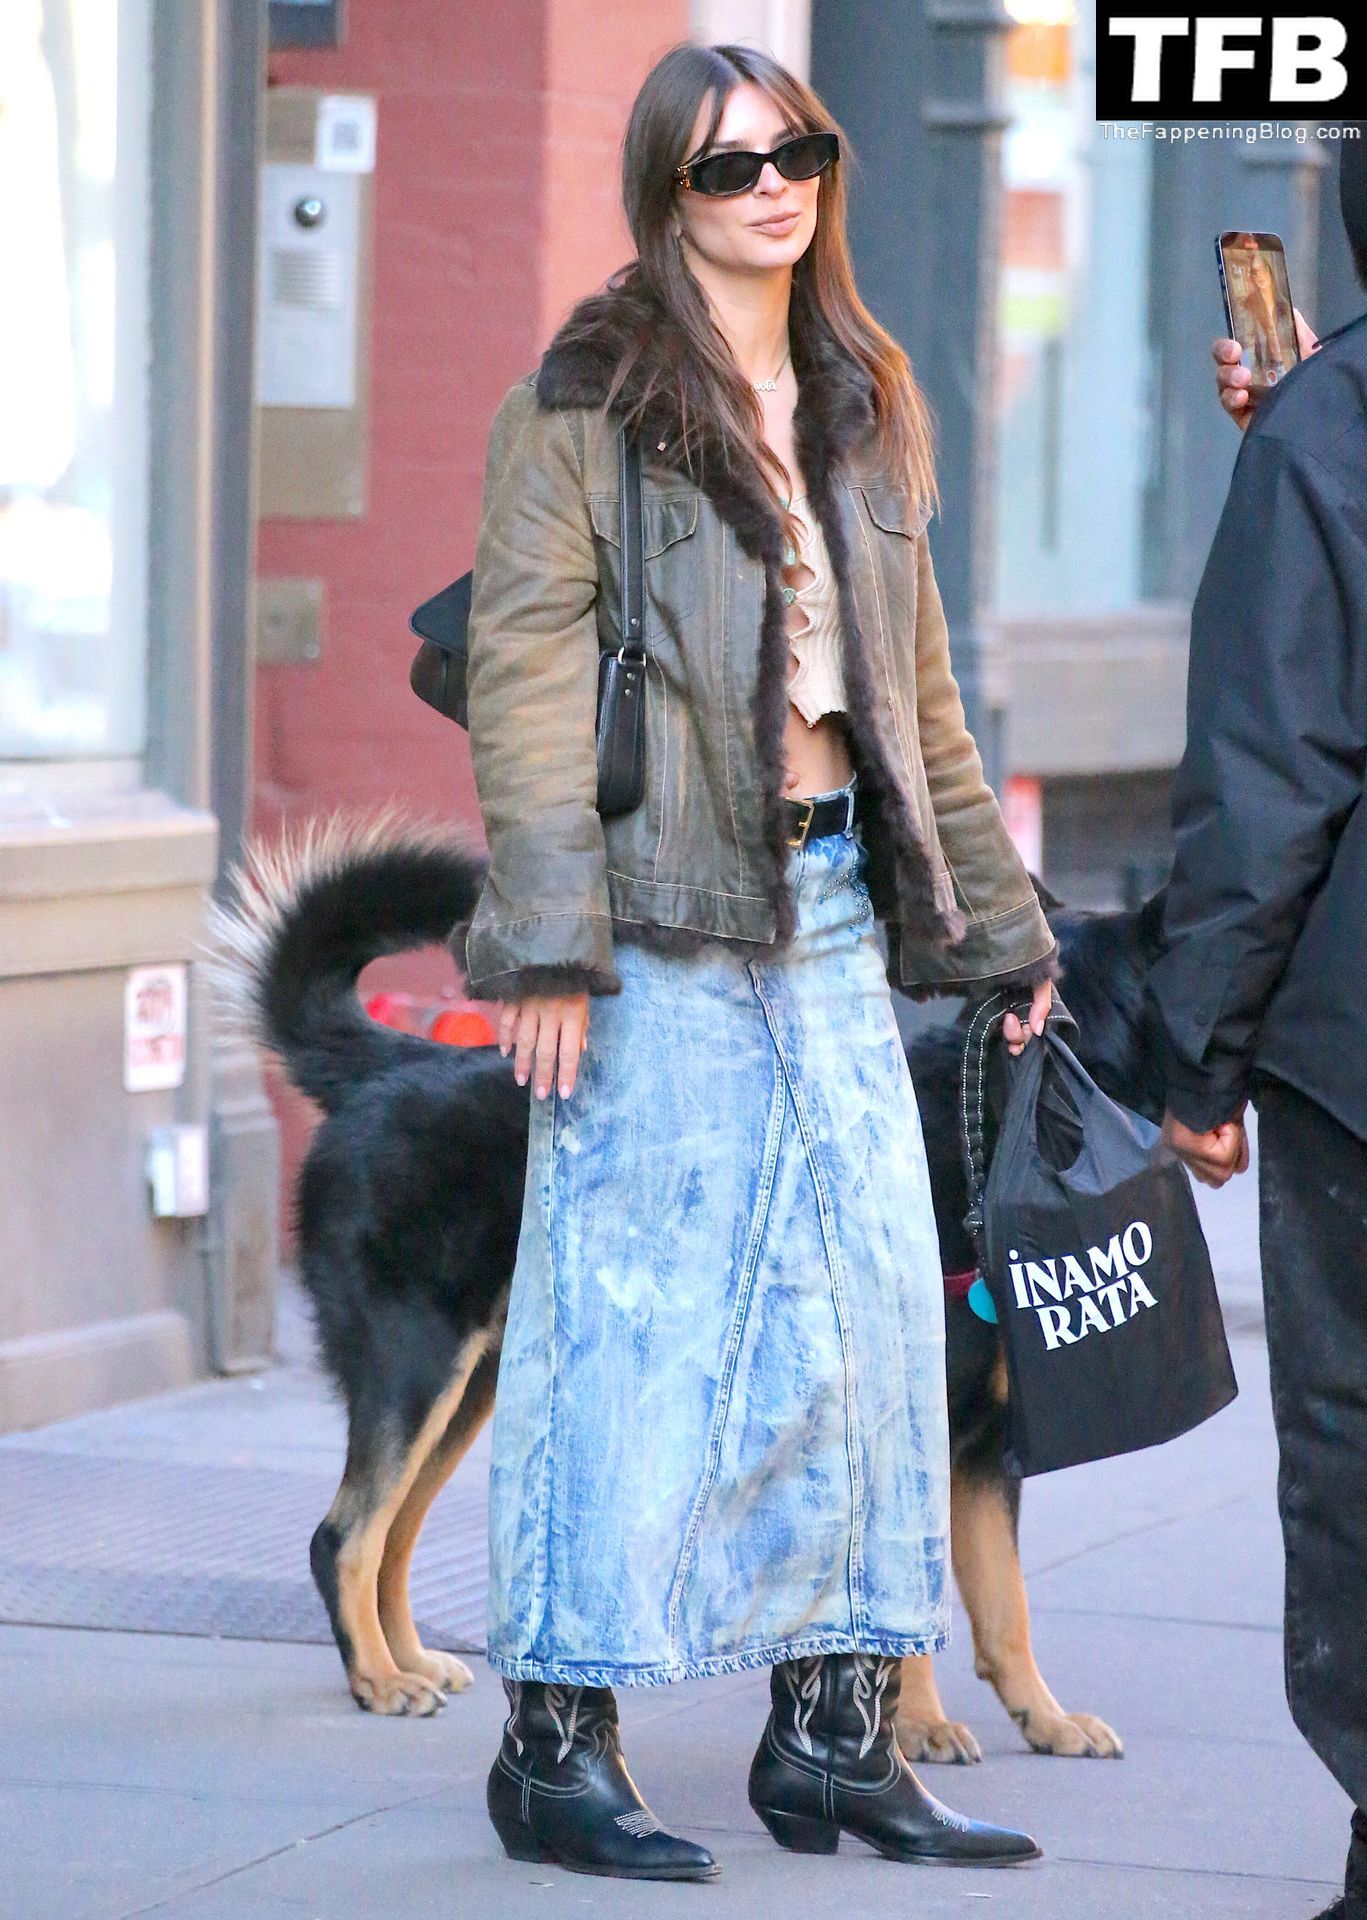 Emily Ratajkowski Wears a Crop Top With a Denim Skirt While Taking Her Dog For a Stroll in NYC (72 Photos)